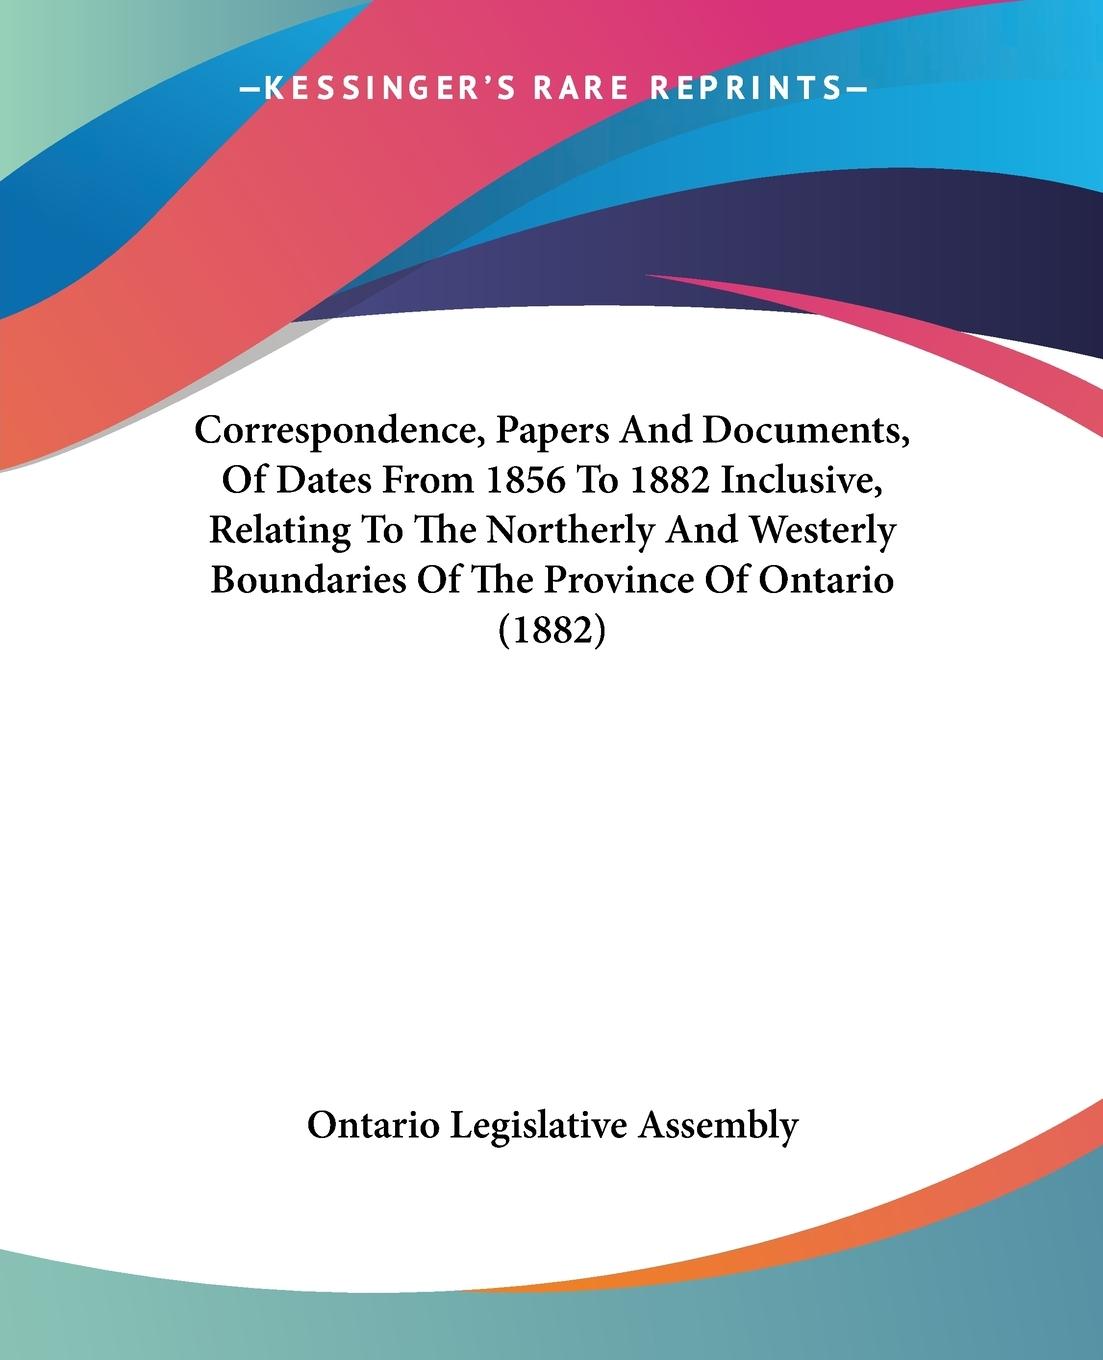 Correspondence, Papers And Documents, Of Dates From 1856 To 1882 Inclusive, Relating To The Northerly And Westerly Boundaries Of The Province Of Ontario (1882) - Ontario Legislative Assembly